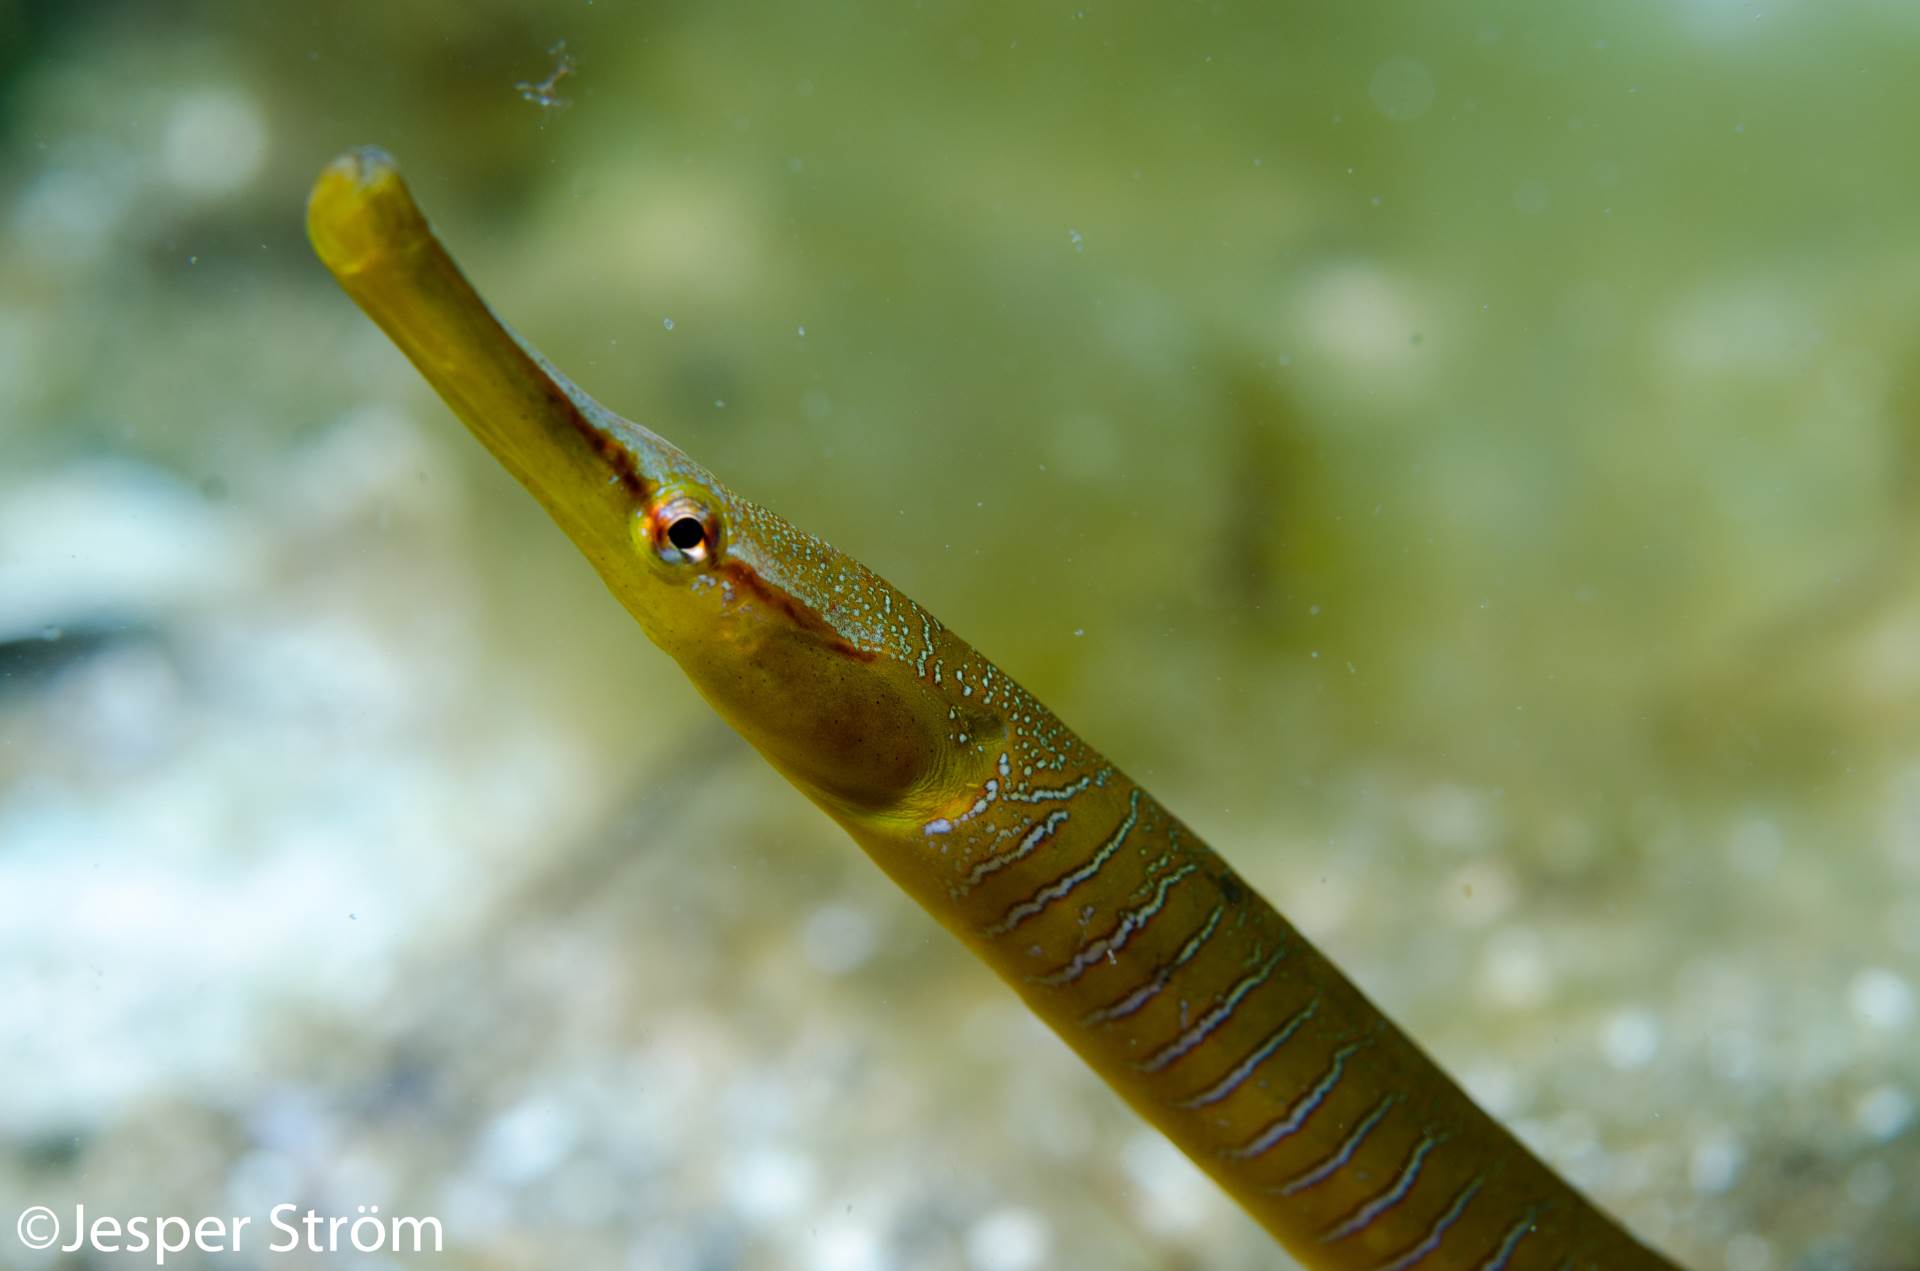 The beauty of the Snake Pipefish is stunning!